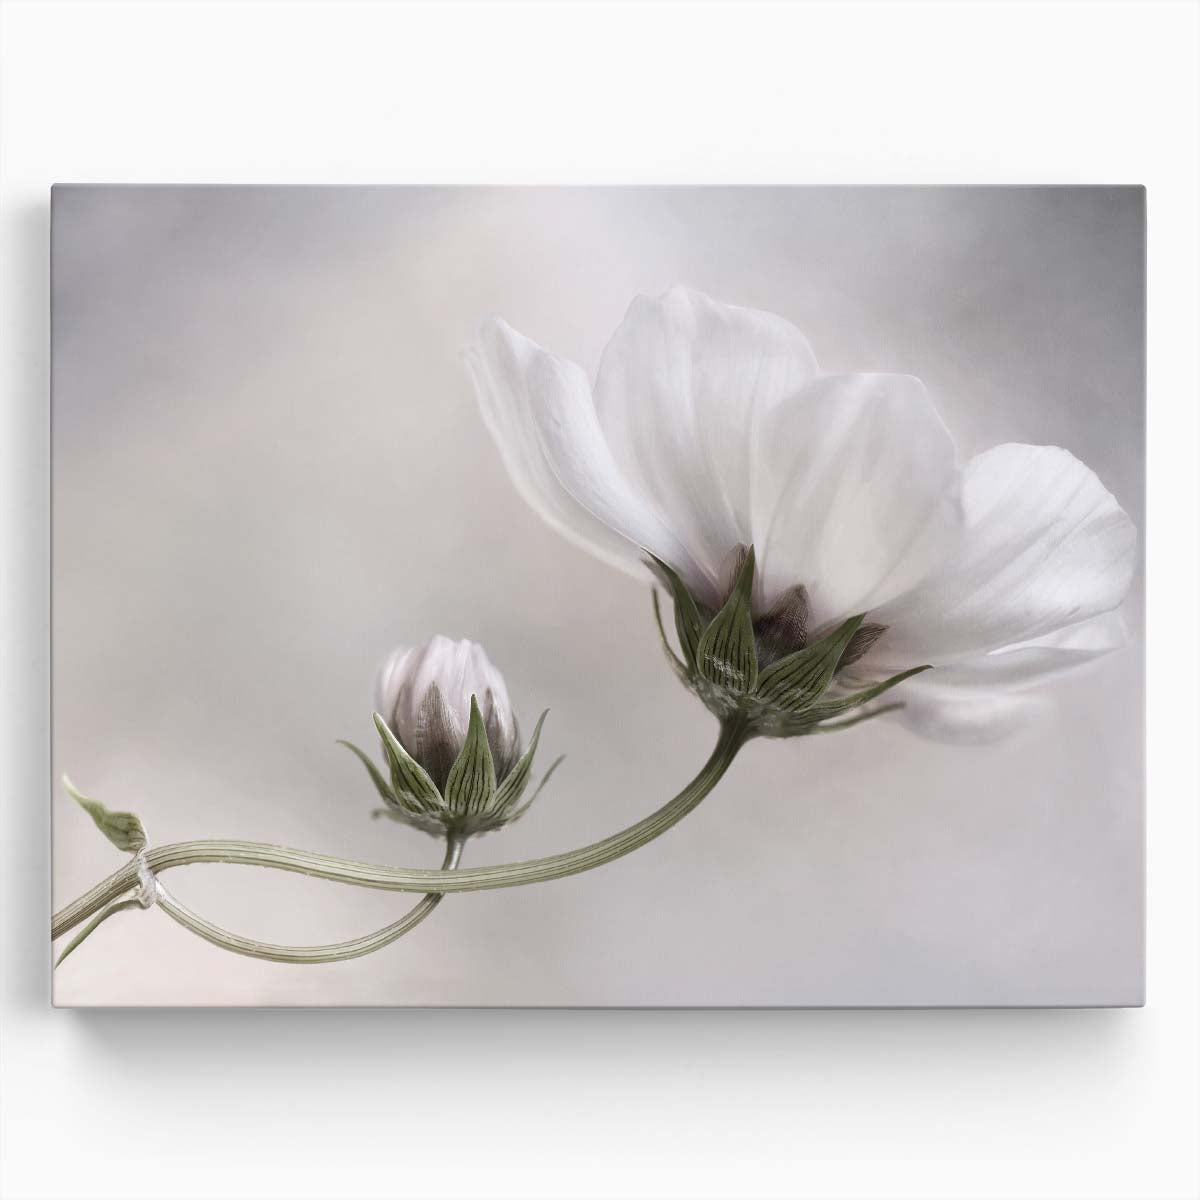 Delicate White Cosmos Flower Macro Photography Wall Art by Luxuriance Designs. Made in USA.